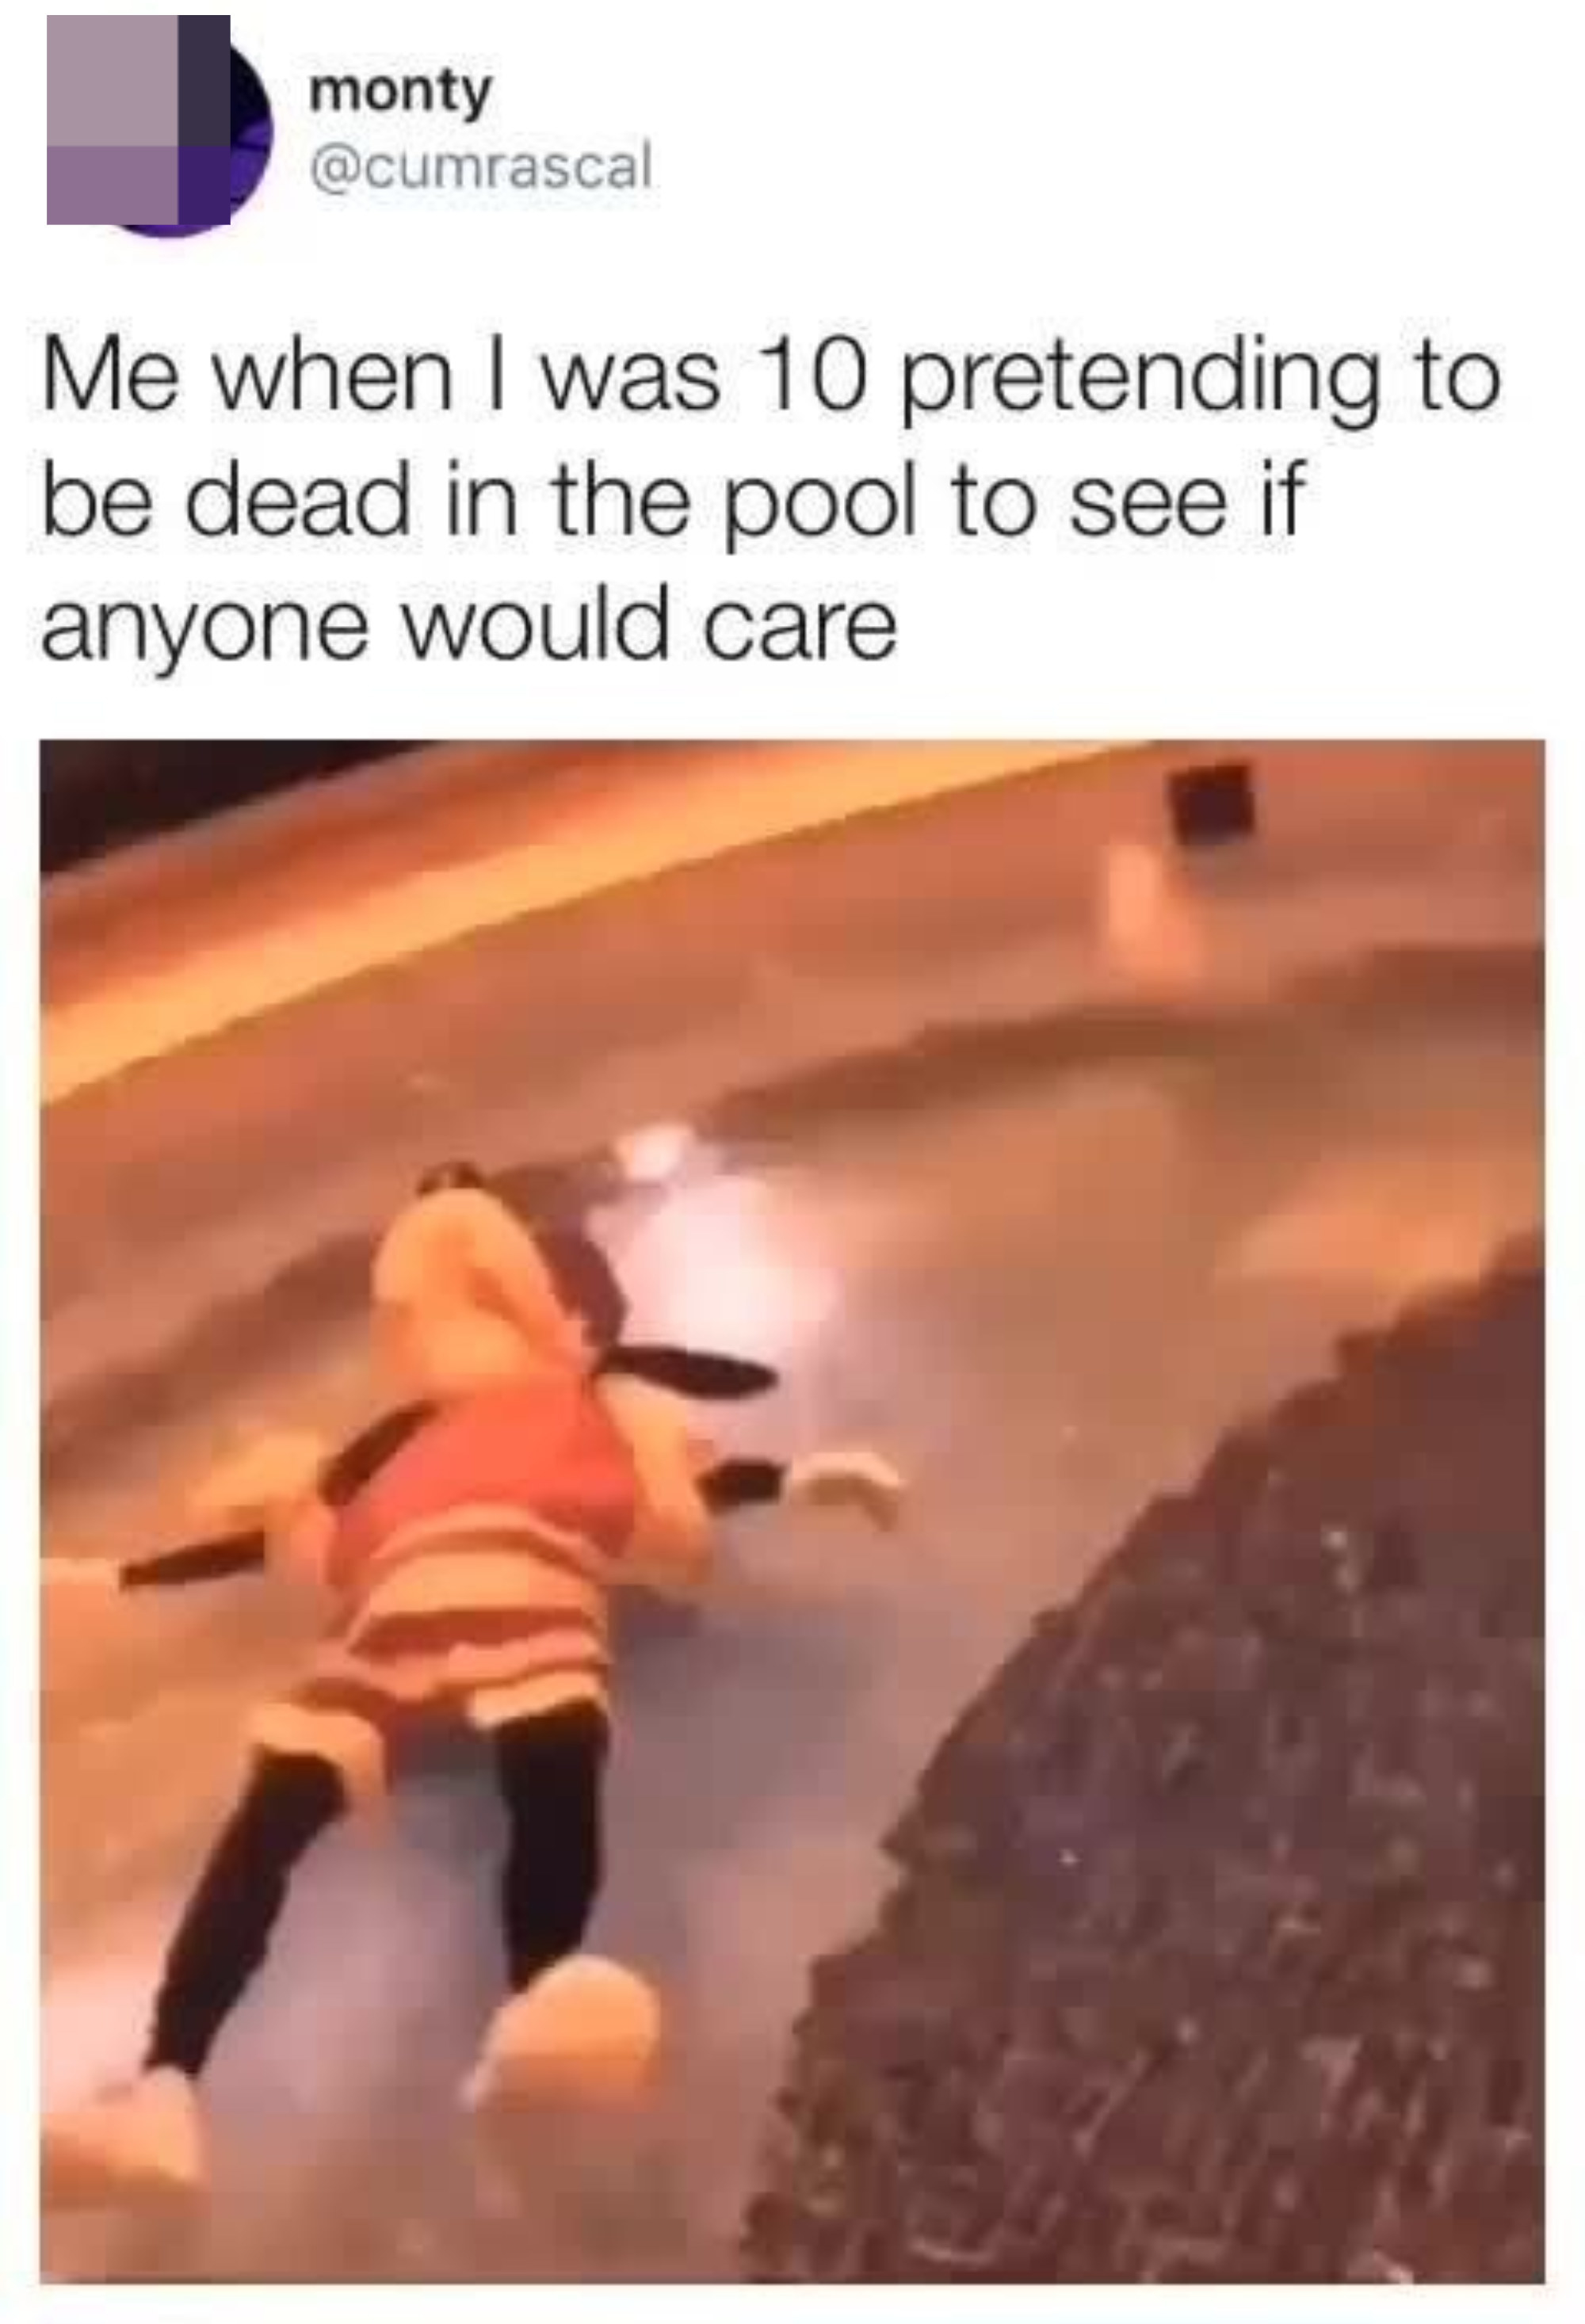 Tweet with Goofy lying in water with the text &quot;Me when I was 10 pretending to be dead in the pool to see if anyone would care&quot;